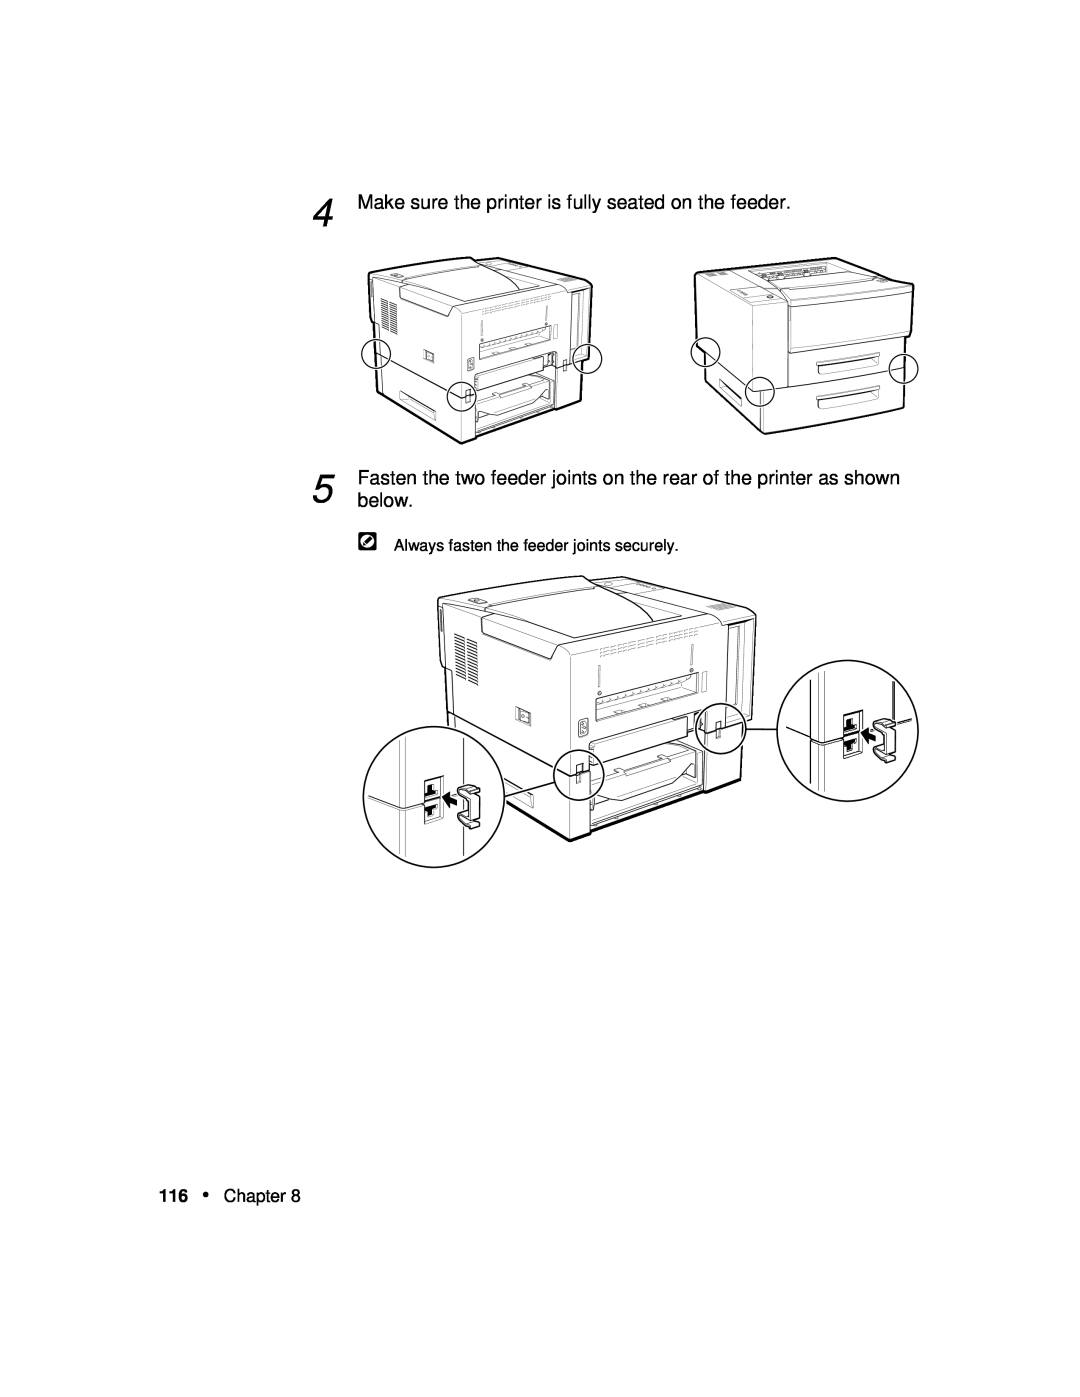 Xerox P12 manual Make sure the printer is fully seated on the feeder, Chapter 